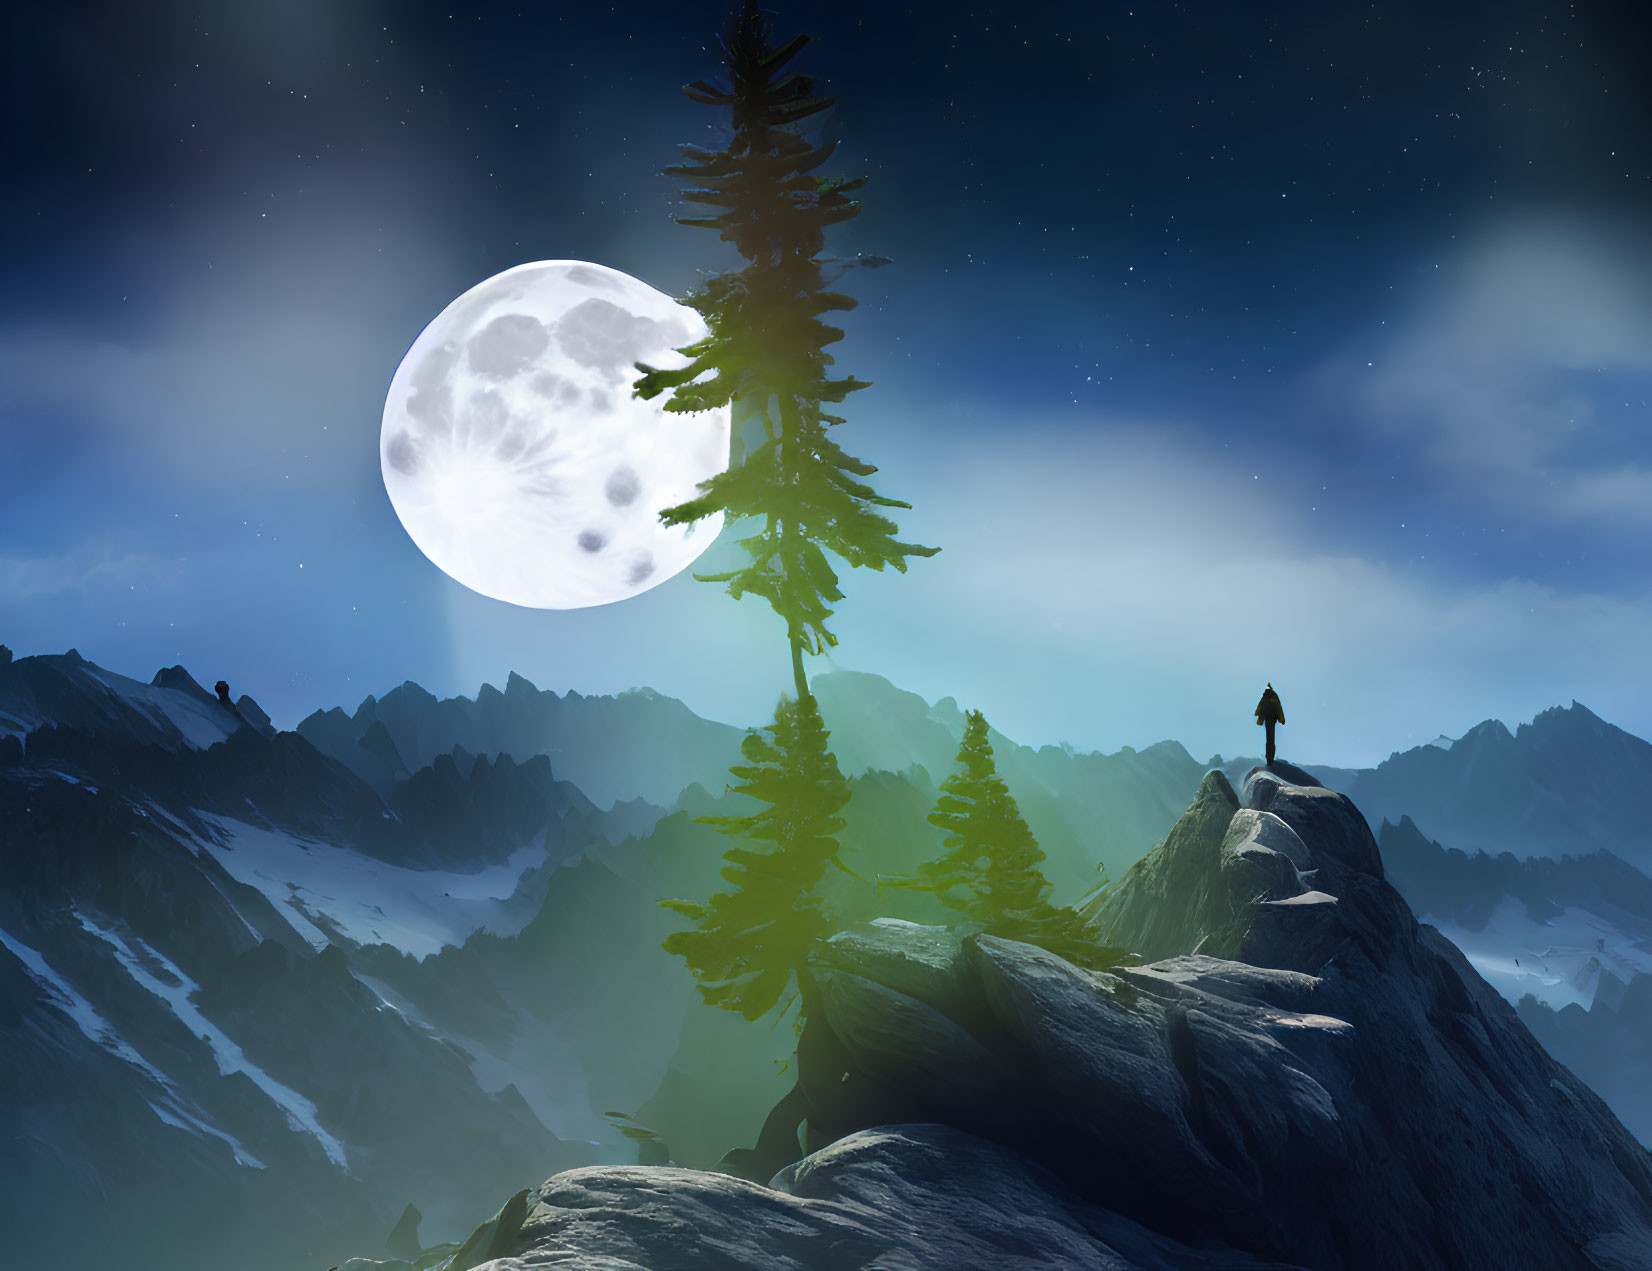 Person standing on mountain peak under starry sky with full moon and towering pines